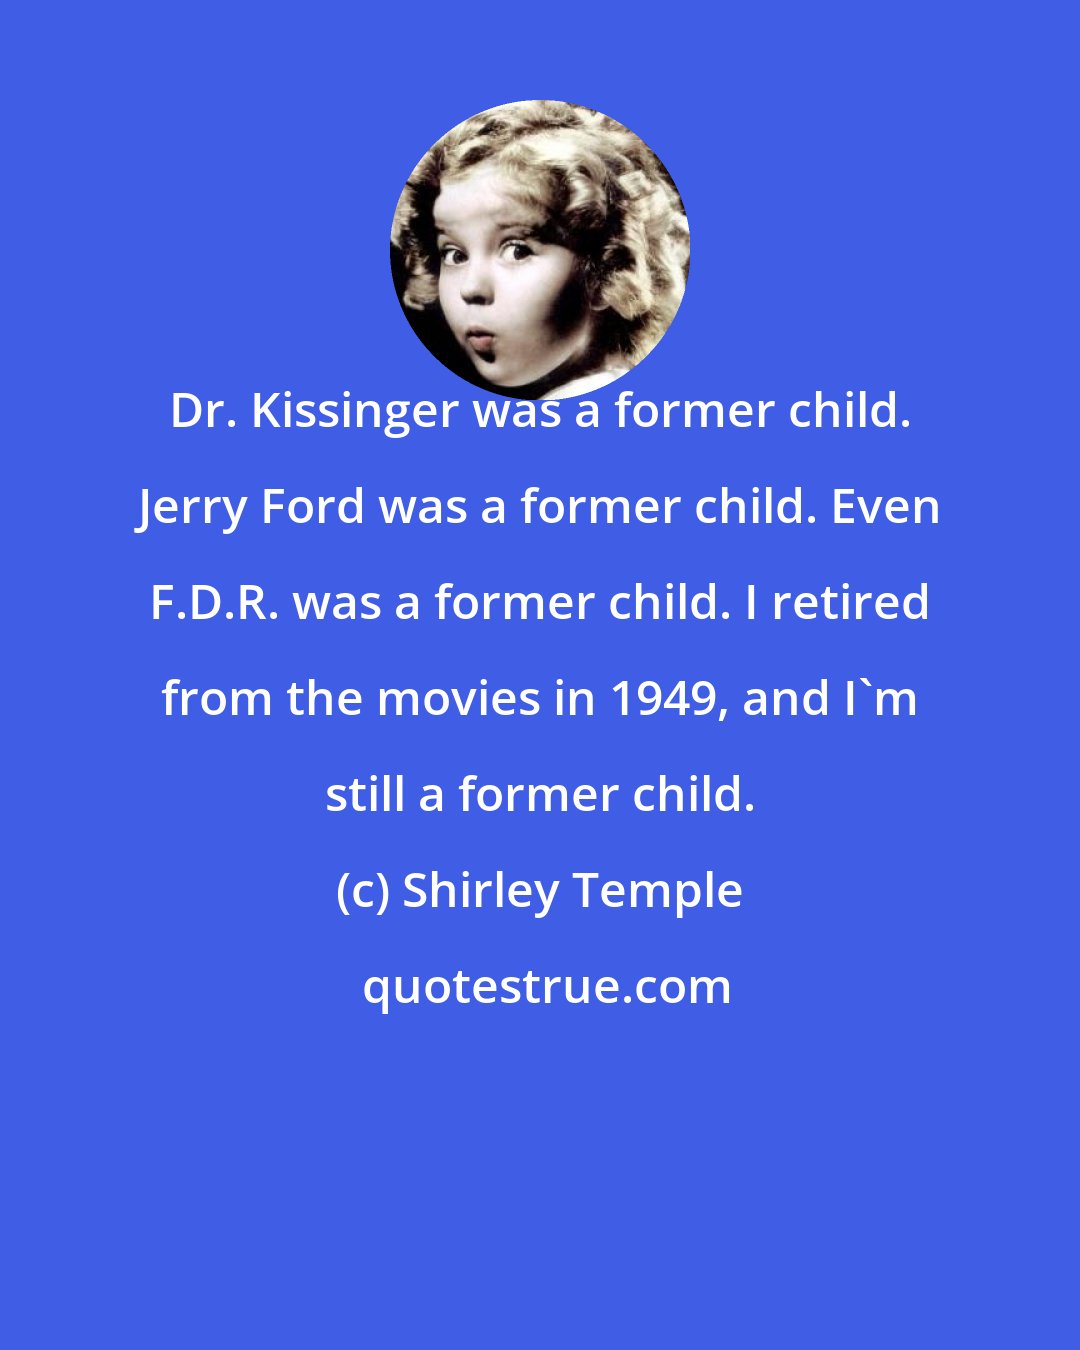 Shirley Temple: Dr. Kissinger was a former child. Jerry Ford was a former child. Even F.D.R. was a former child. I retired from the movies in 1949, and I'm still a former child.